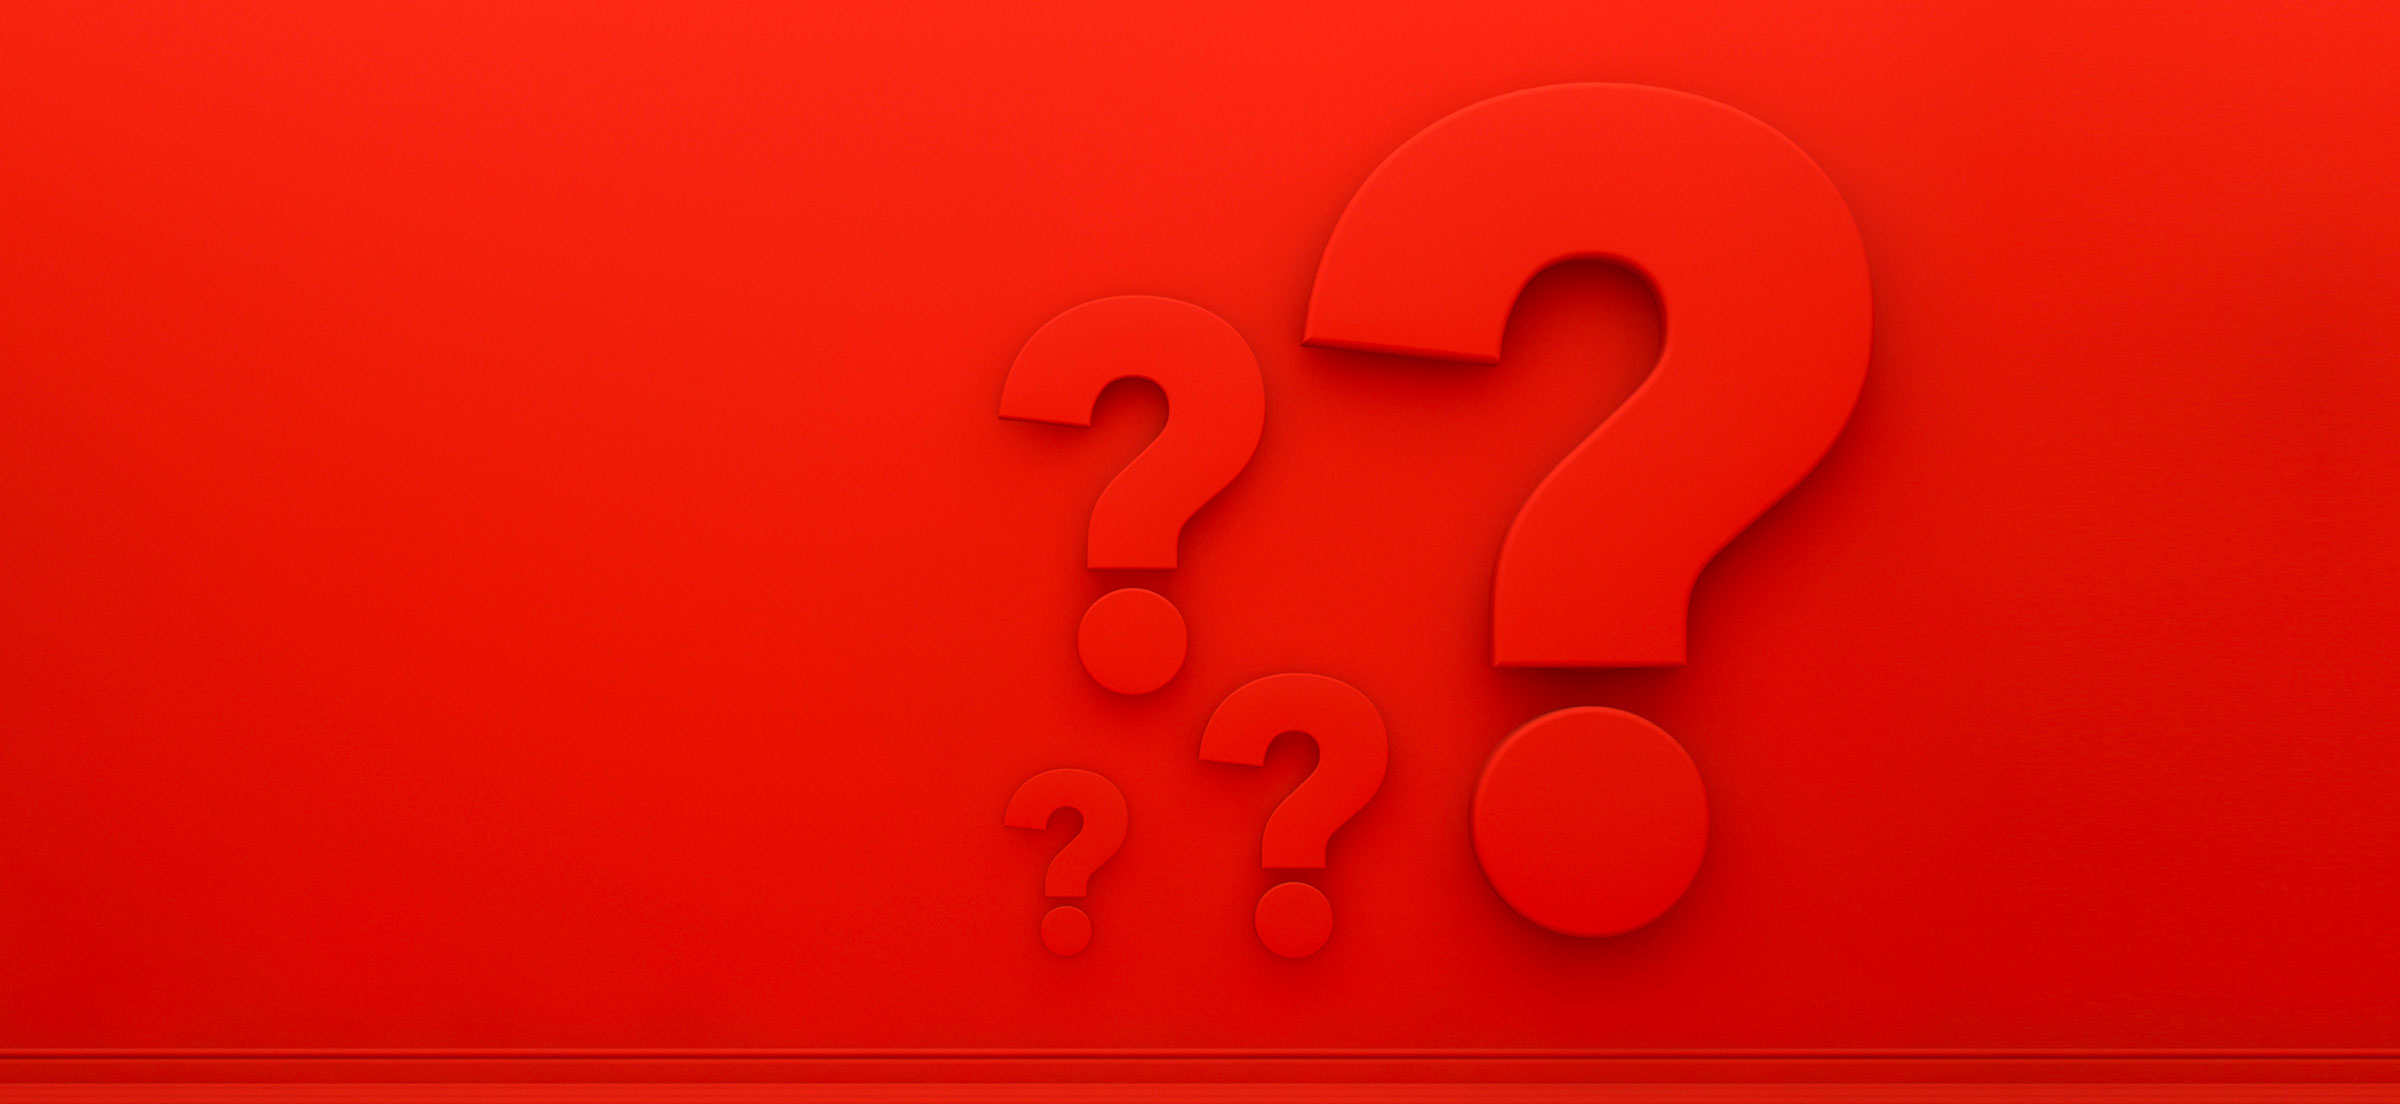 Question marks on a red background.